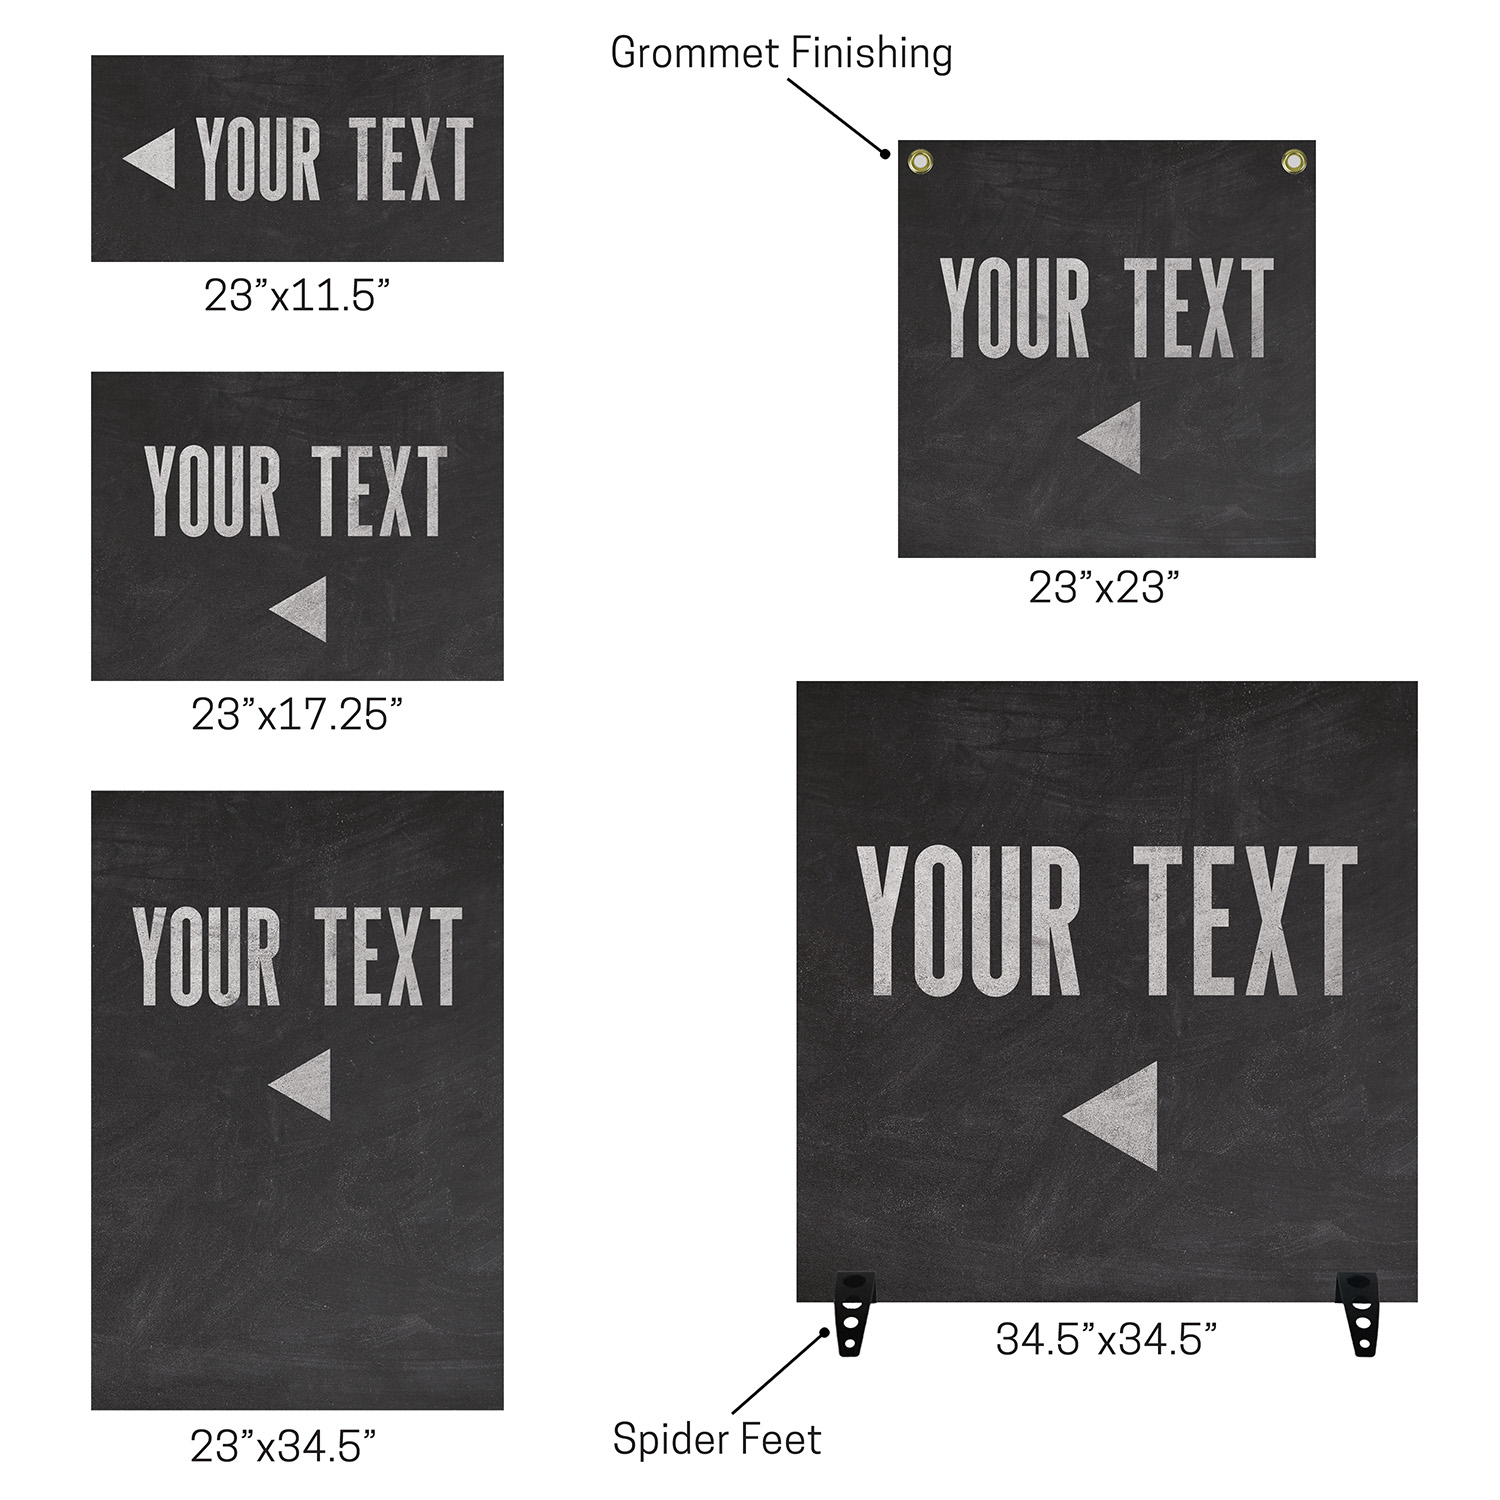 Rigid Signs, Curved Colors Products, Curved Colors Kindergarten, 23 x 23 2